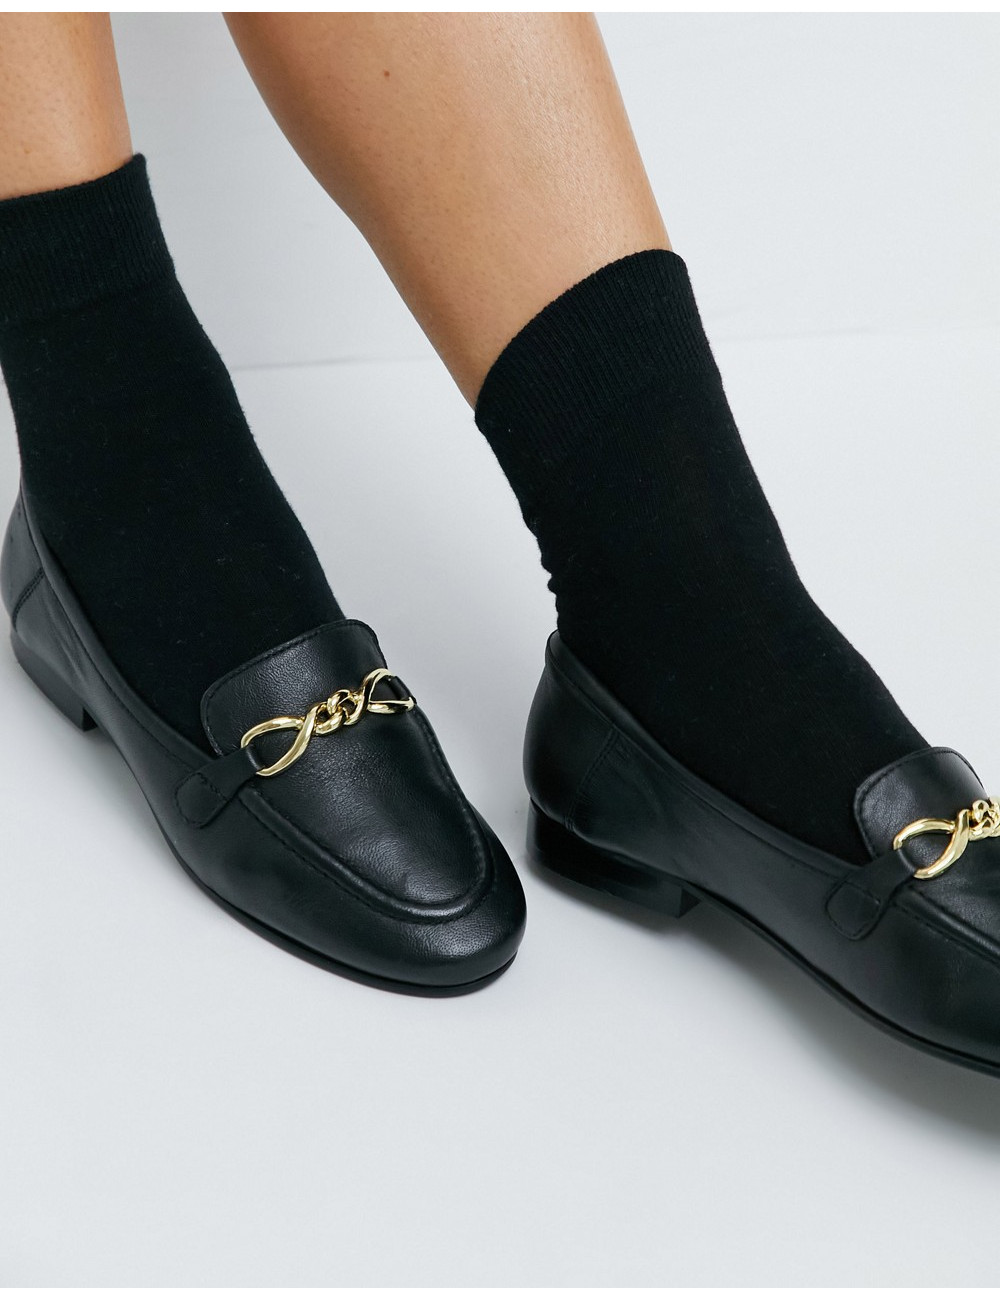 Topshop loafers in black